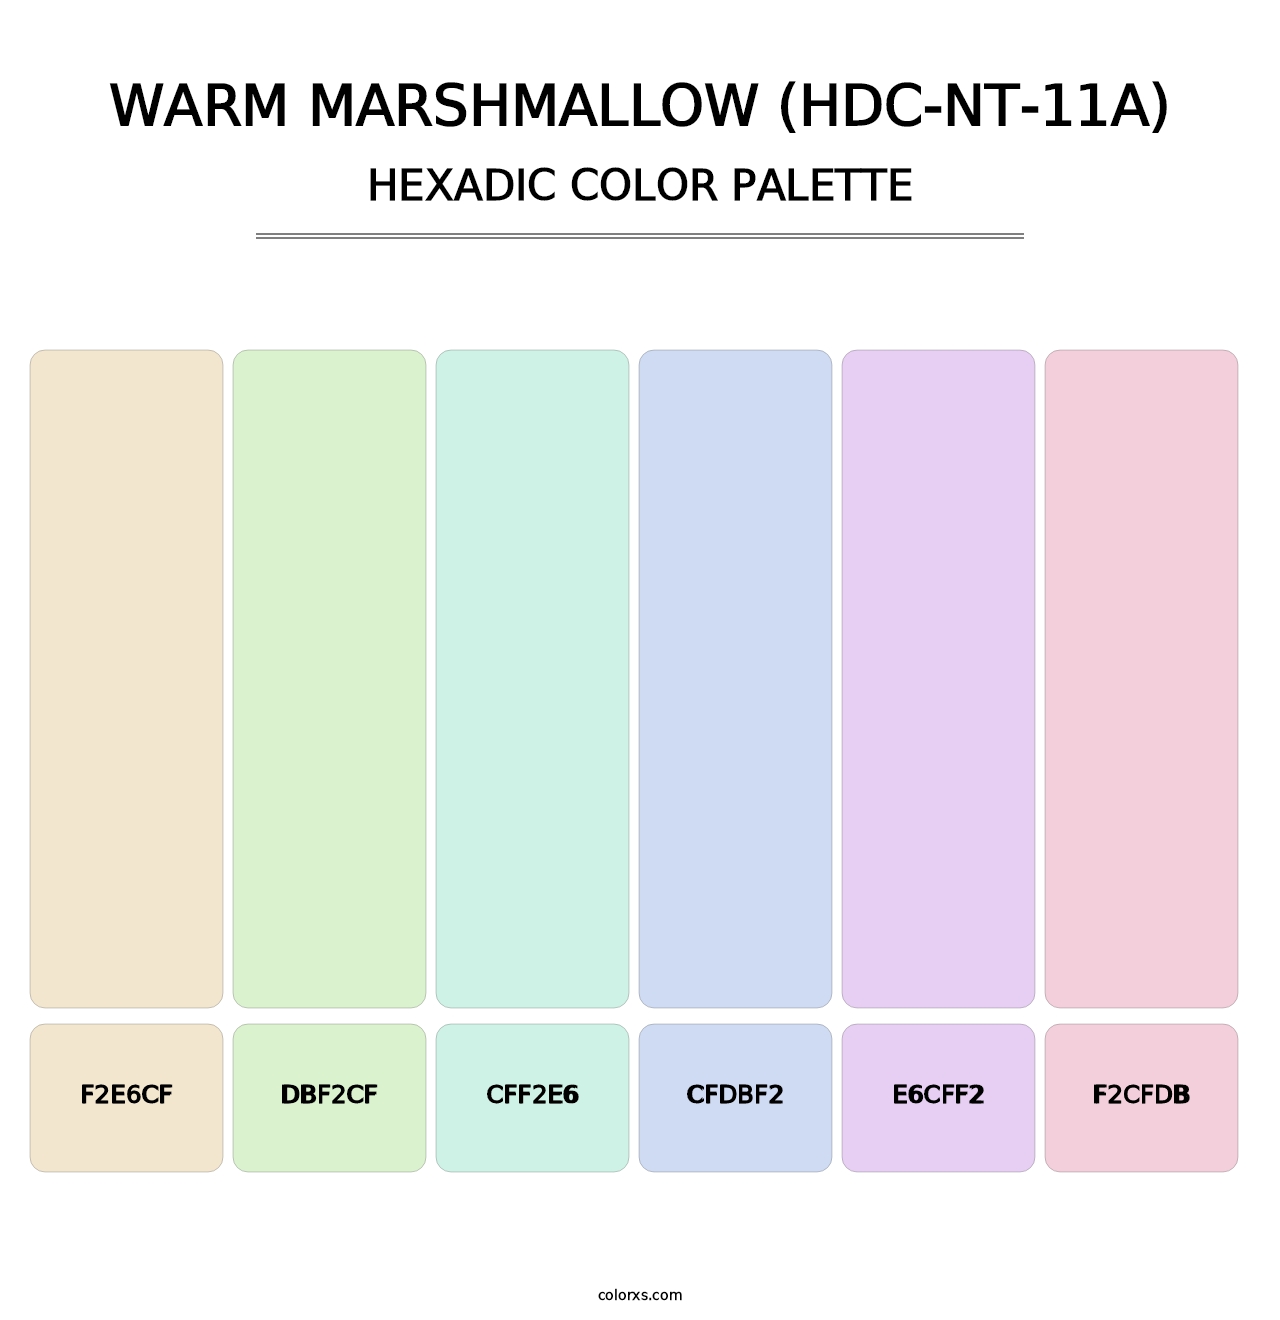 Warm Marshmallow (HDC-NT-11A) - Hexadic Color Palette